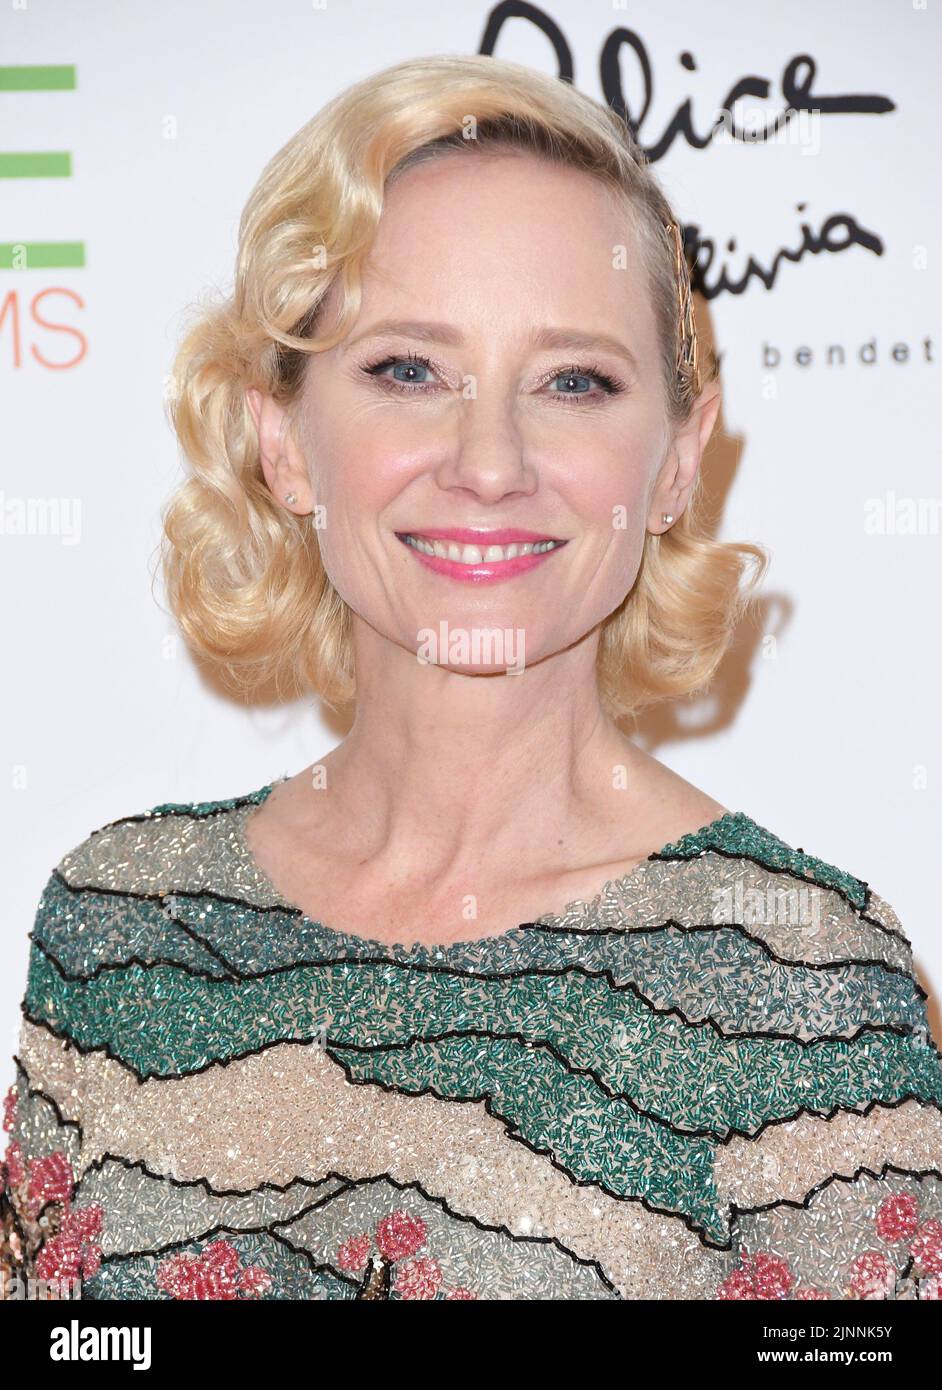 Beverly Hills, United States. 12th Aug, 2022. ARCHIVE: 20 April 2018 - Beverly Hills, California - Anne Heche. 25th Annual Race To Erase MS Gala held at Beverly Hilton Hotel Credit: Birdie Thompson/AdMedia/Newscom/Alamy Live News Stock Photo